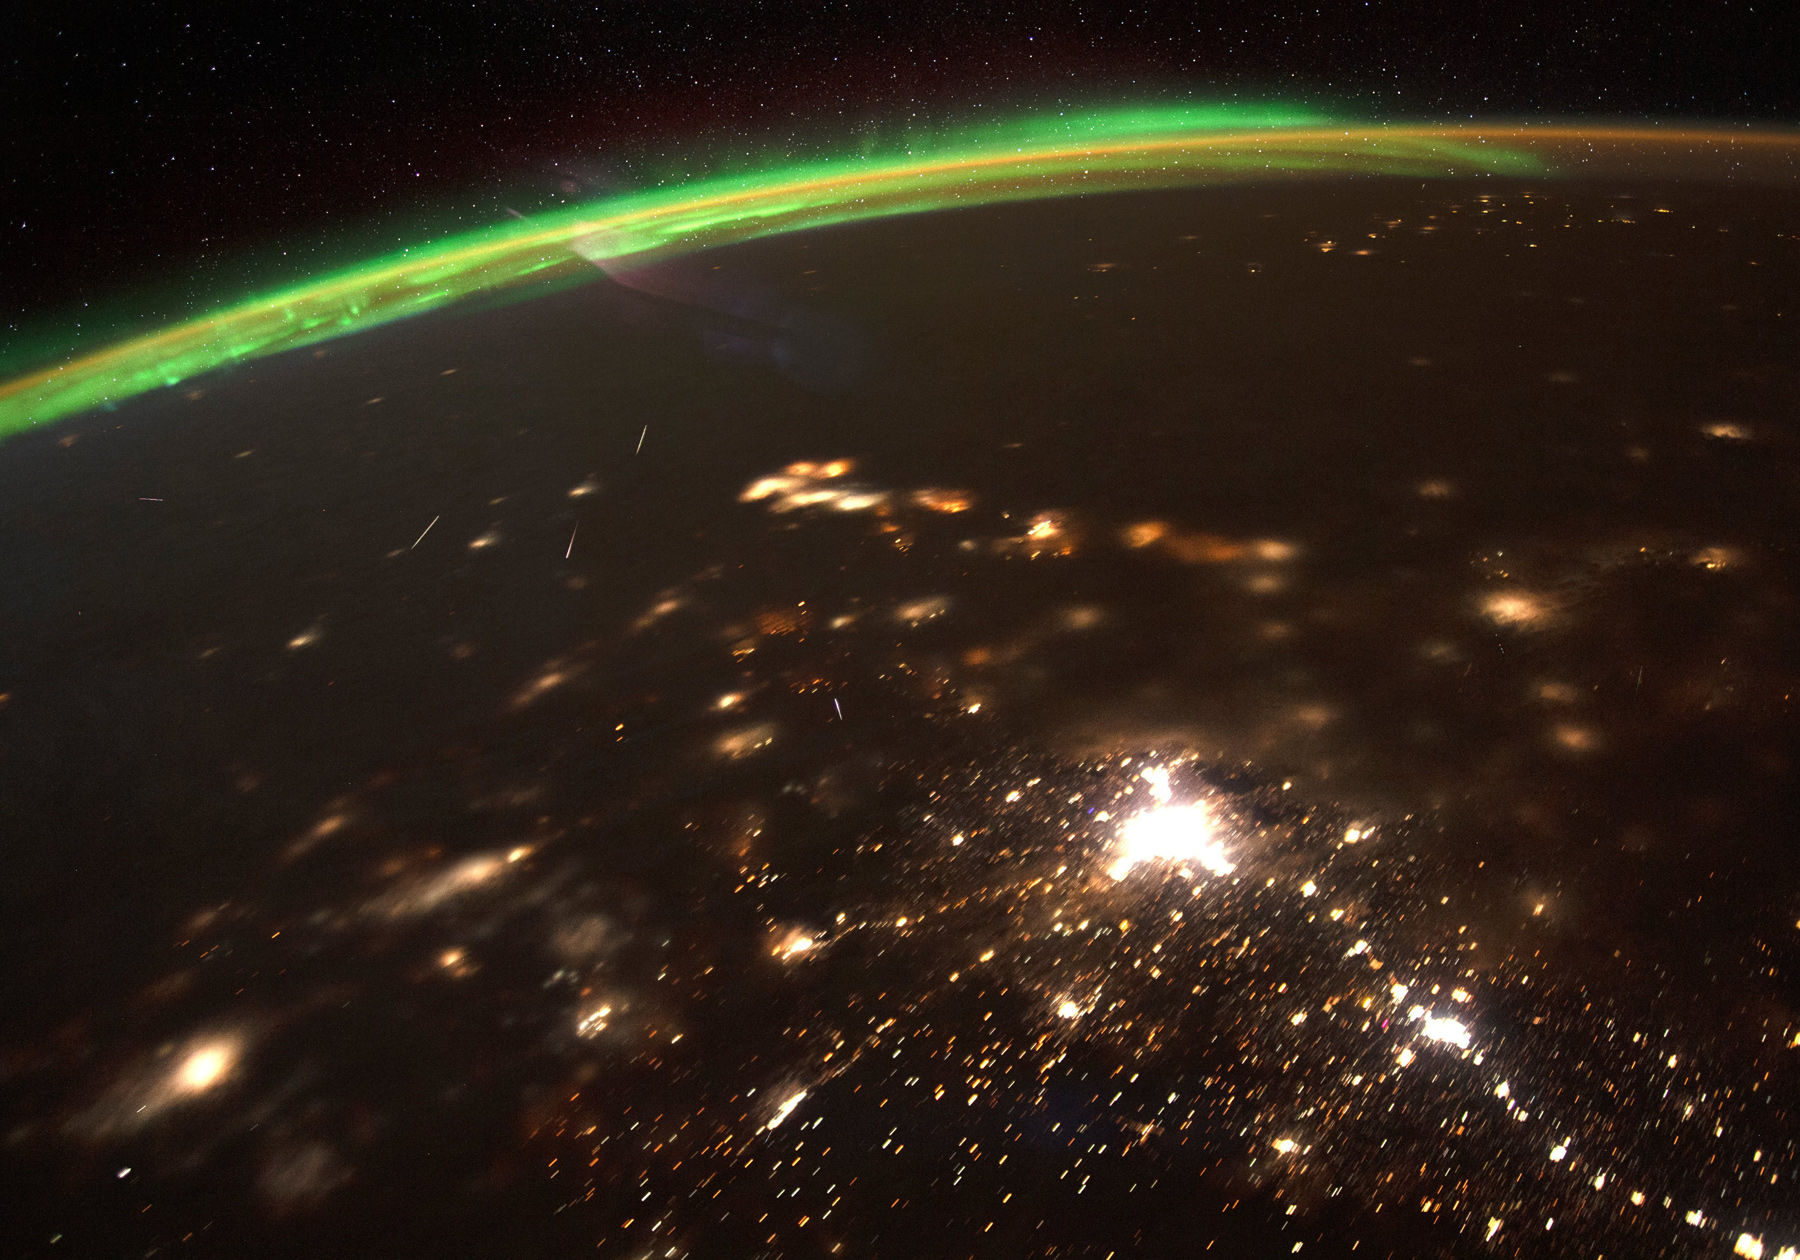 A composite photo (made up of several individual pictures) of Quadrantid meteors burning up over Earth, taken from the International Space Station on 4 January, 2020. The green glow of the aurora borealis is seen to the north. Credit: NASA